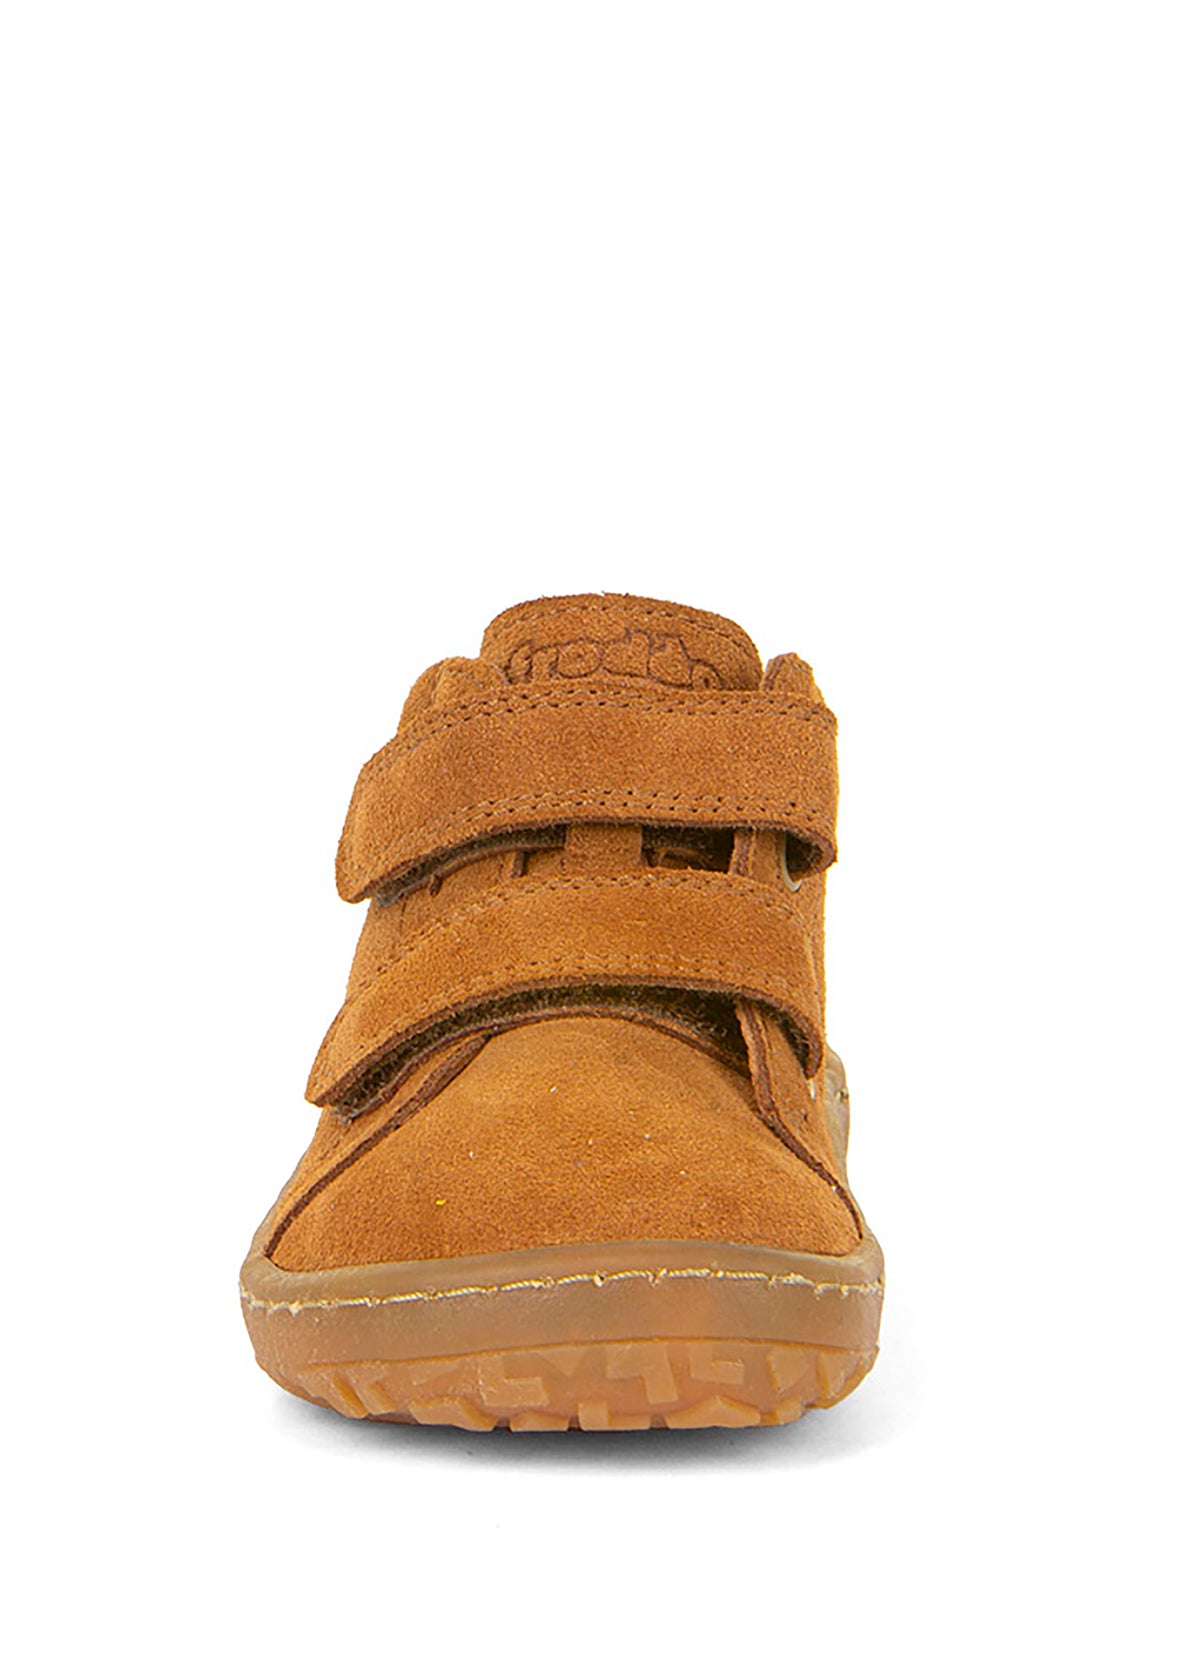 Children's barefoot shoes - cognac brown suede, Barefoot First Step